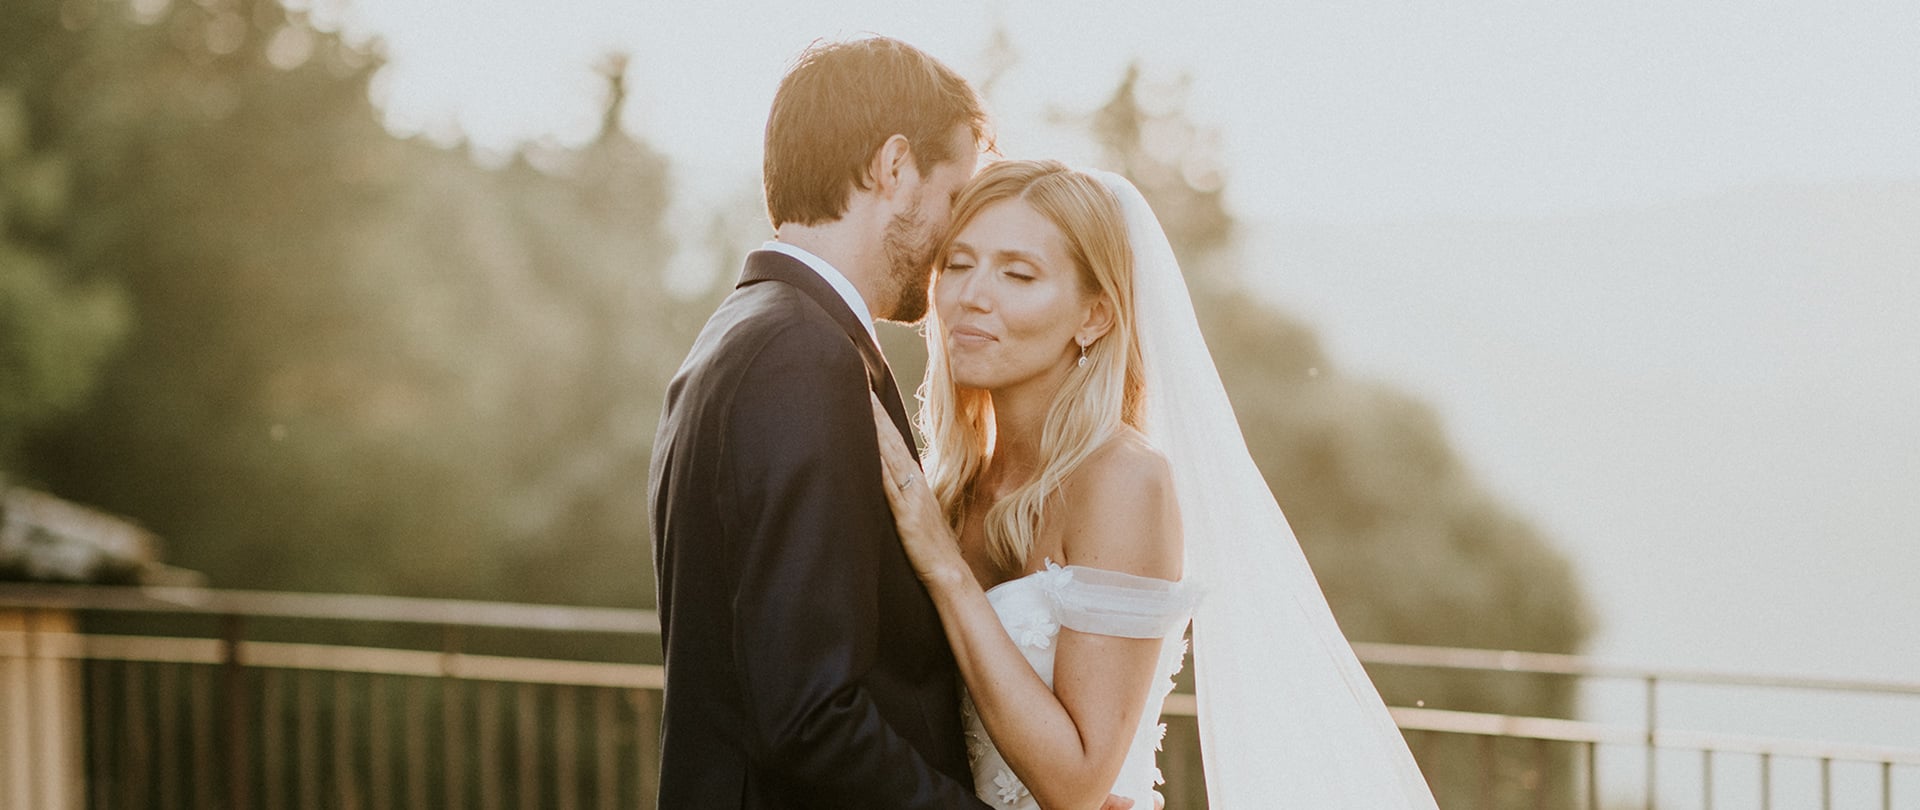 Ivana & Pierre-Laurent Wedding Video Filmed at Tuscany, Italy